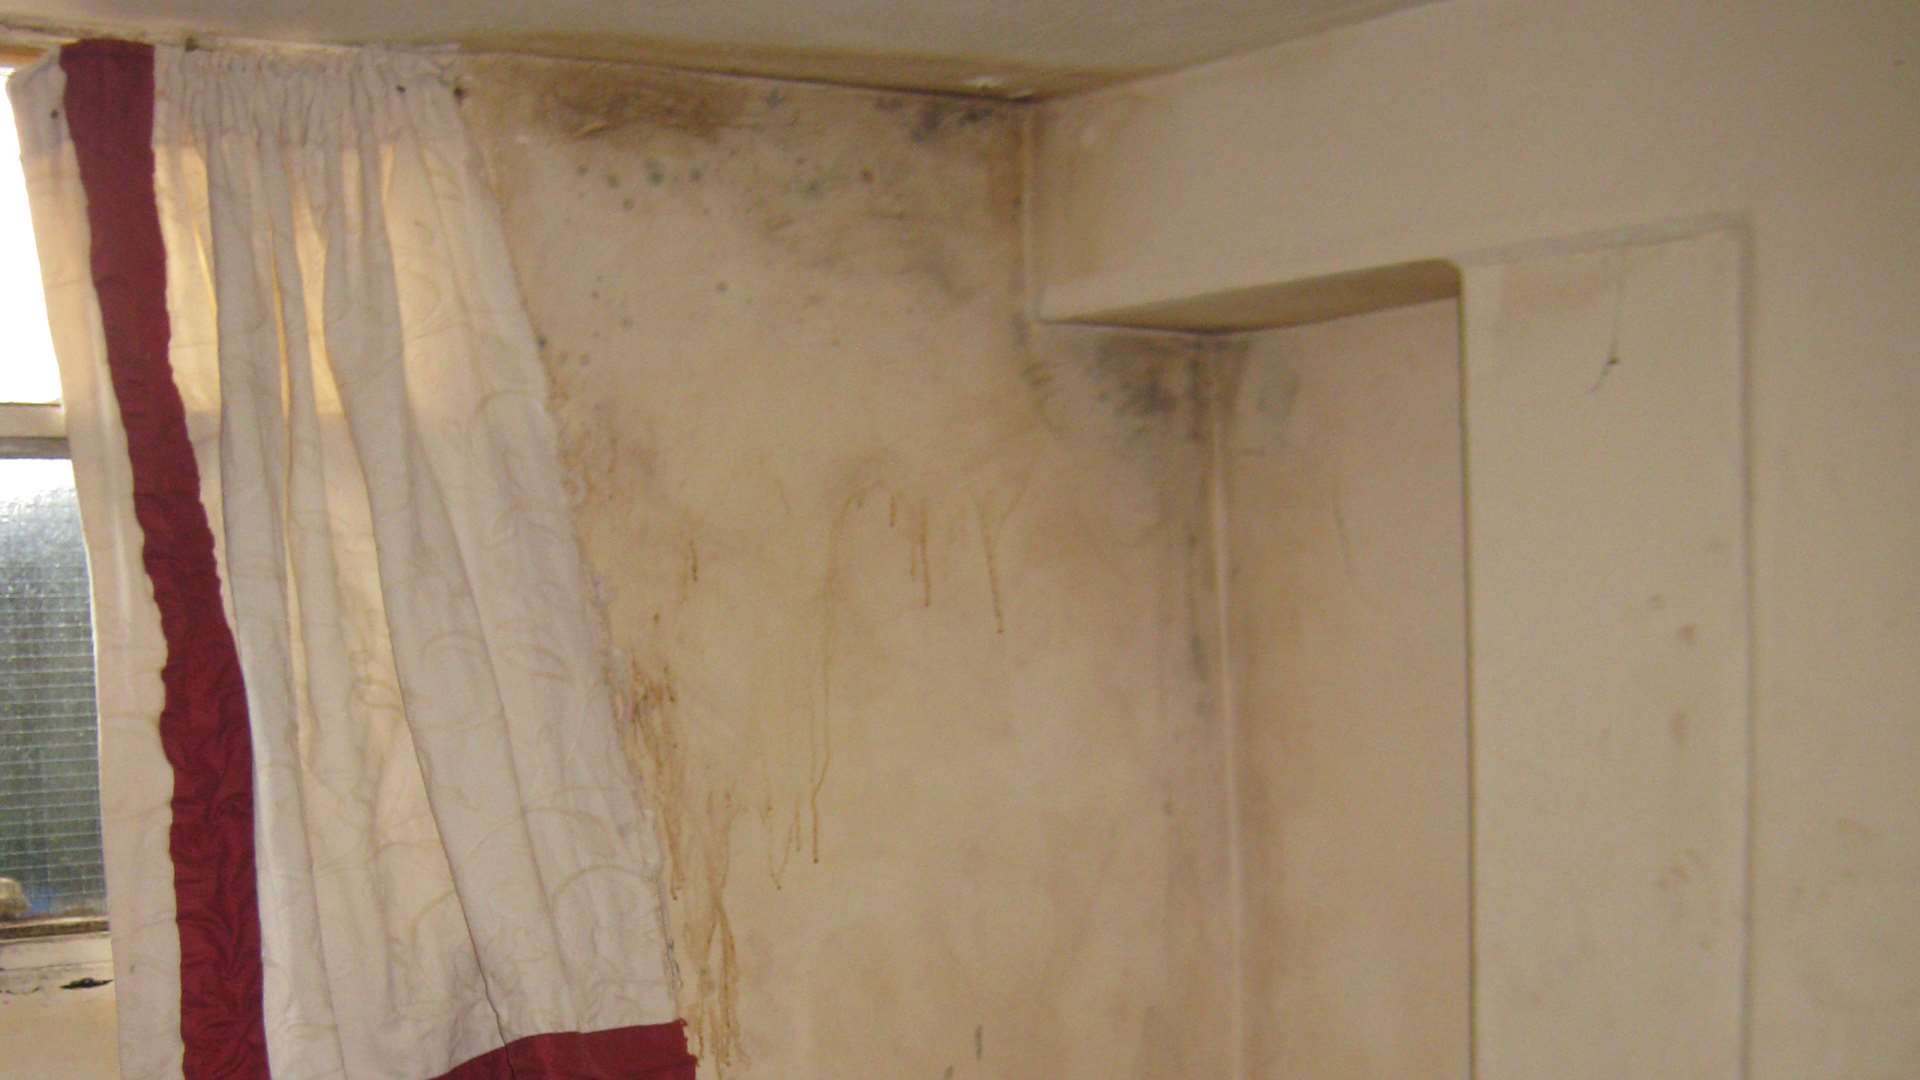 The property in Coronation Road, Chatham had damp, no heating and a broken toilet